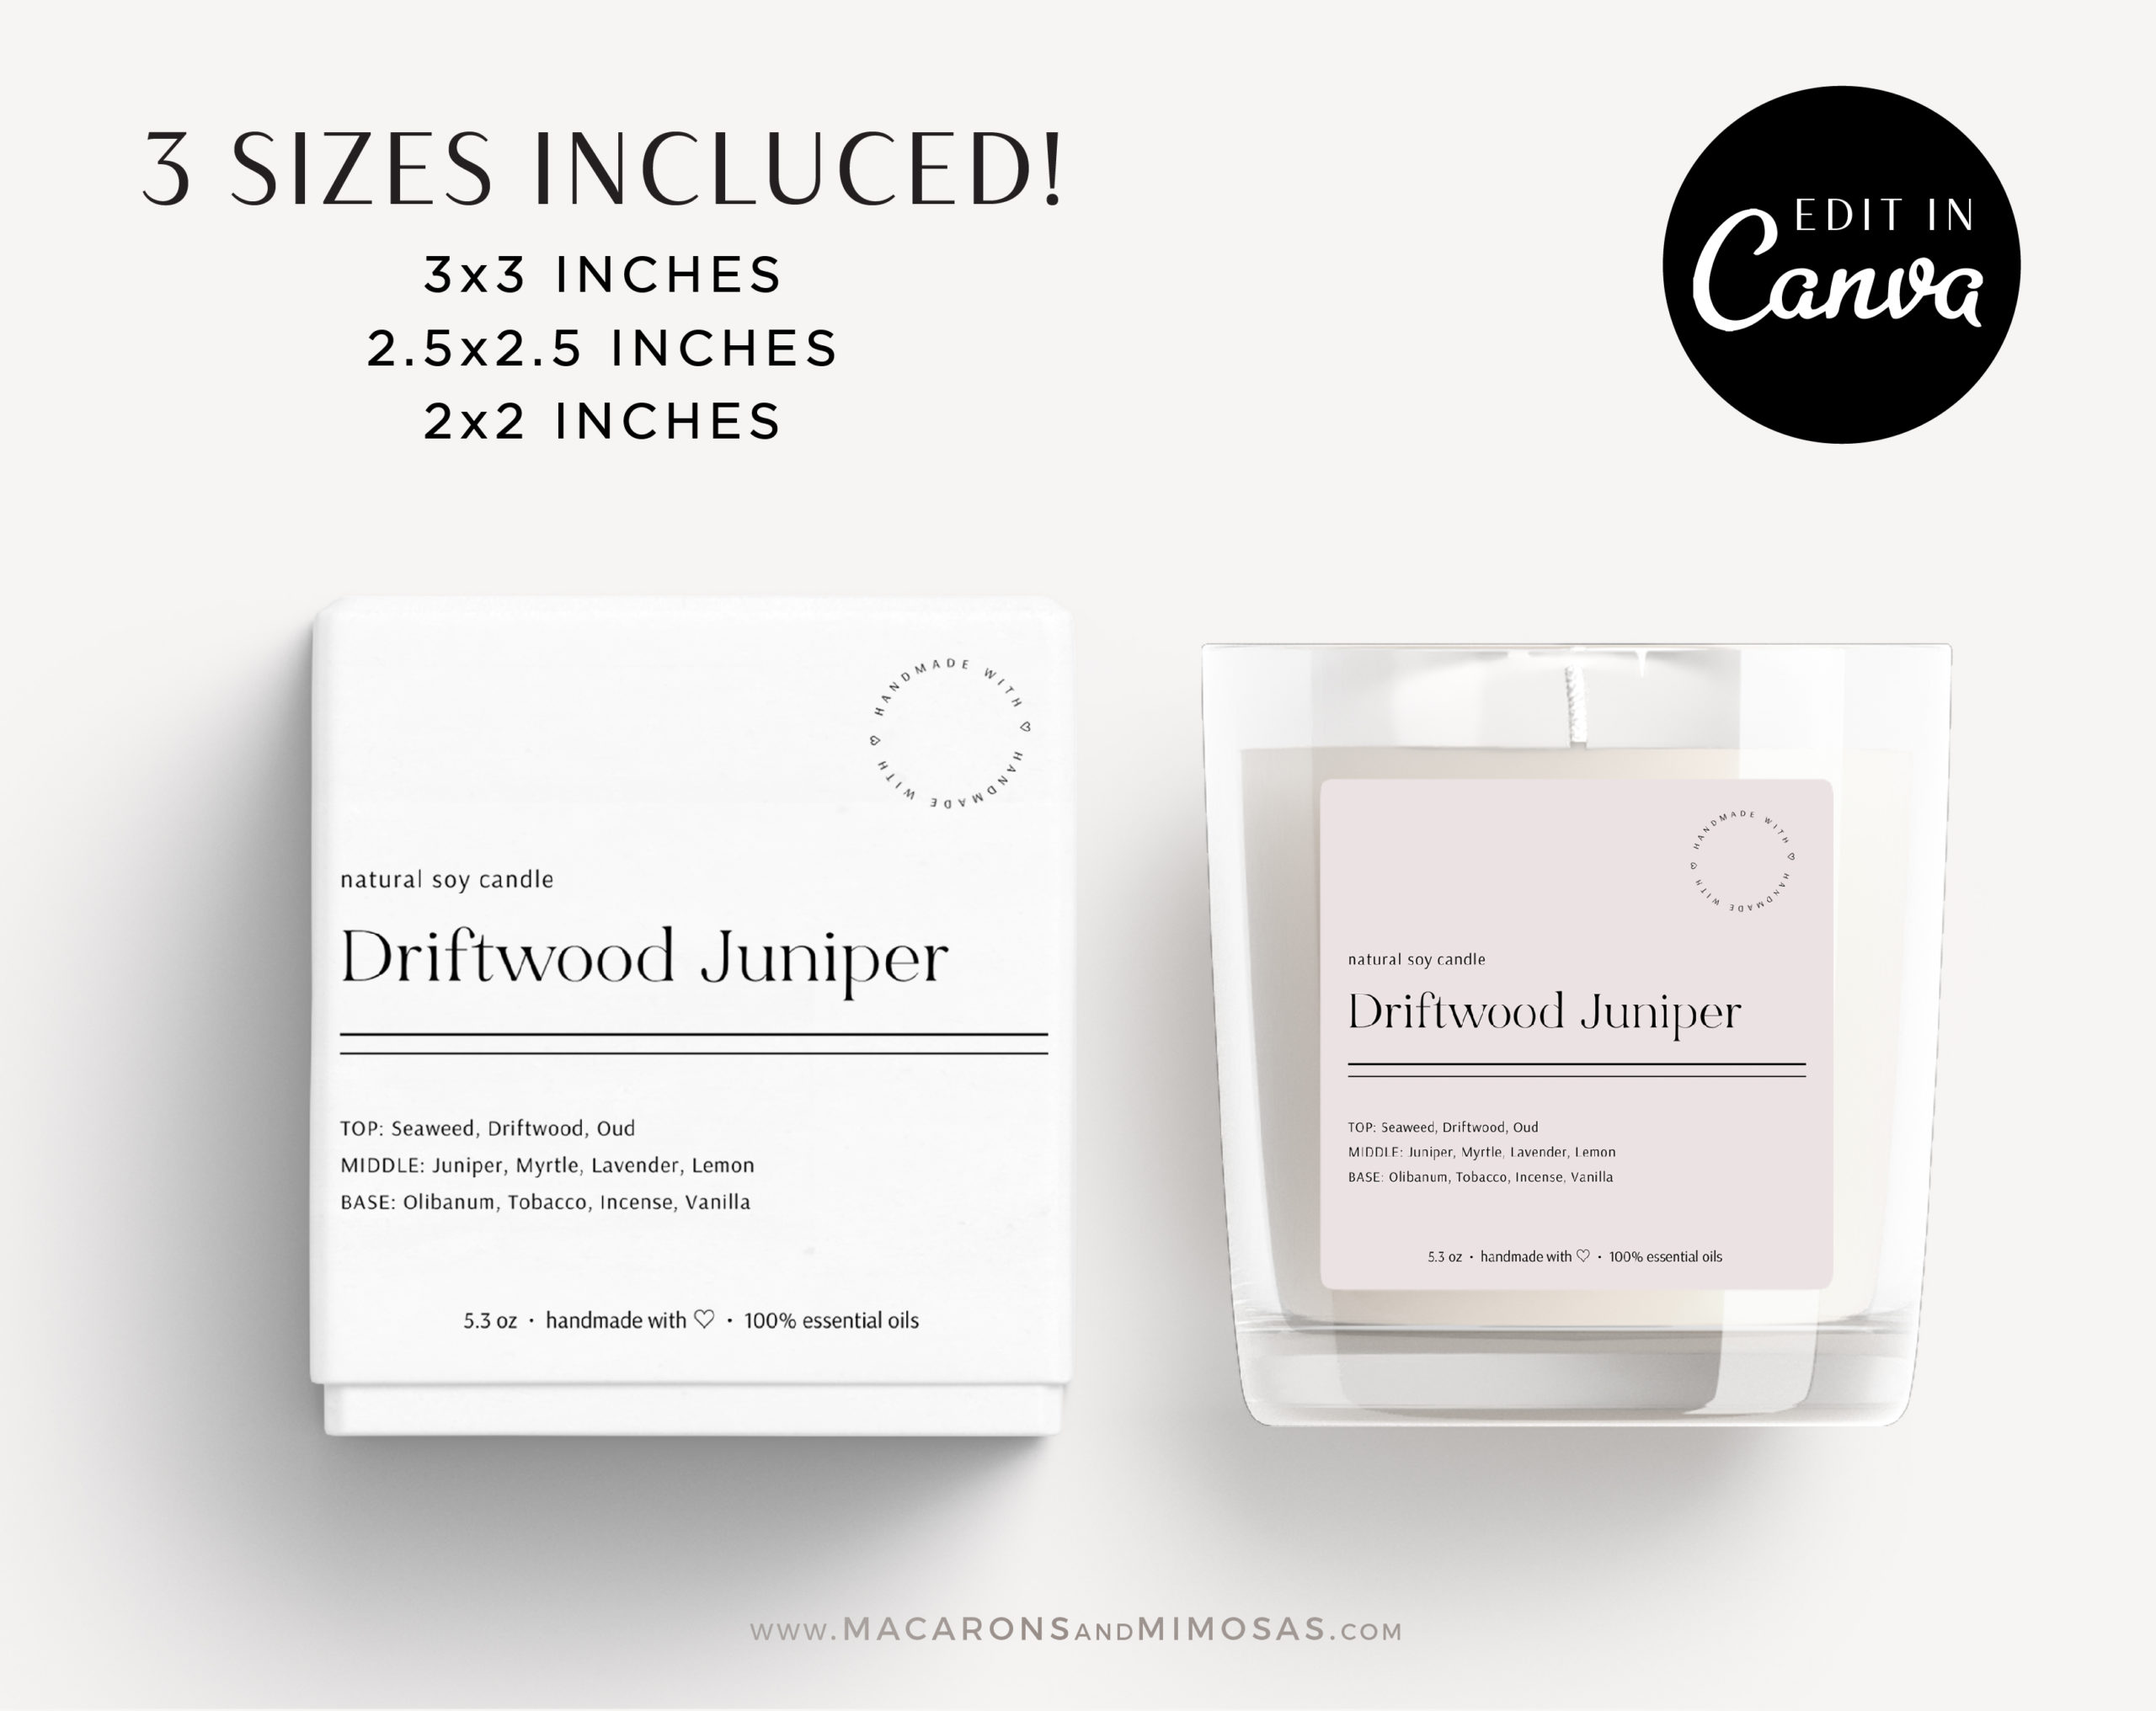 Candle Label Template, Printable Candle Labels, Personalized Candle Label Design, Minimal Candle Label, DIY Editable Candle Logo Jar Label